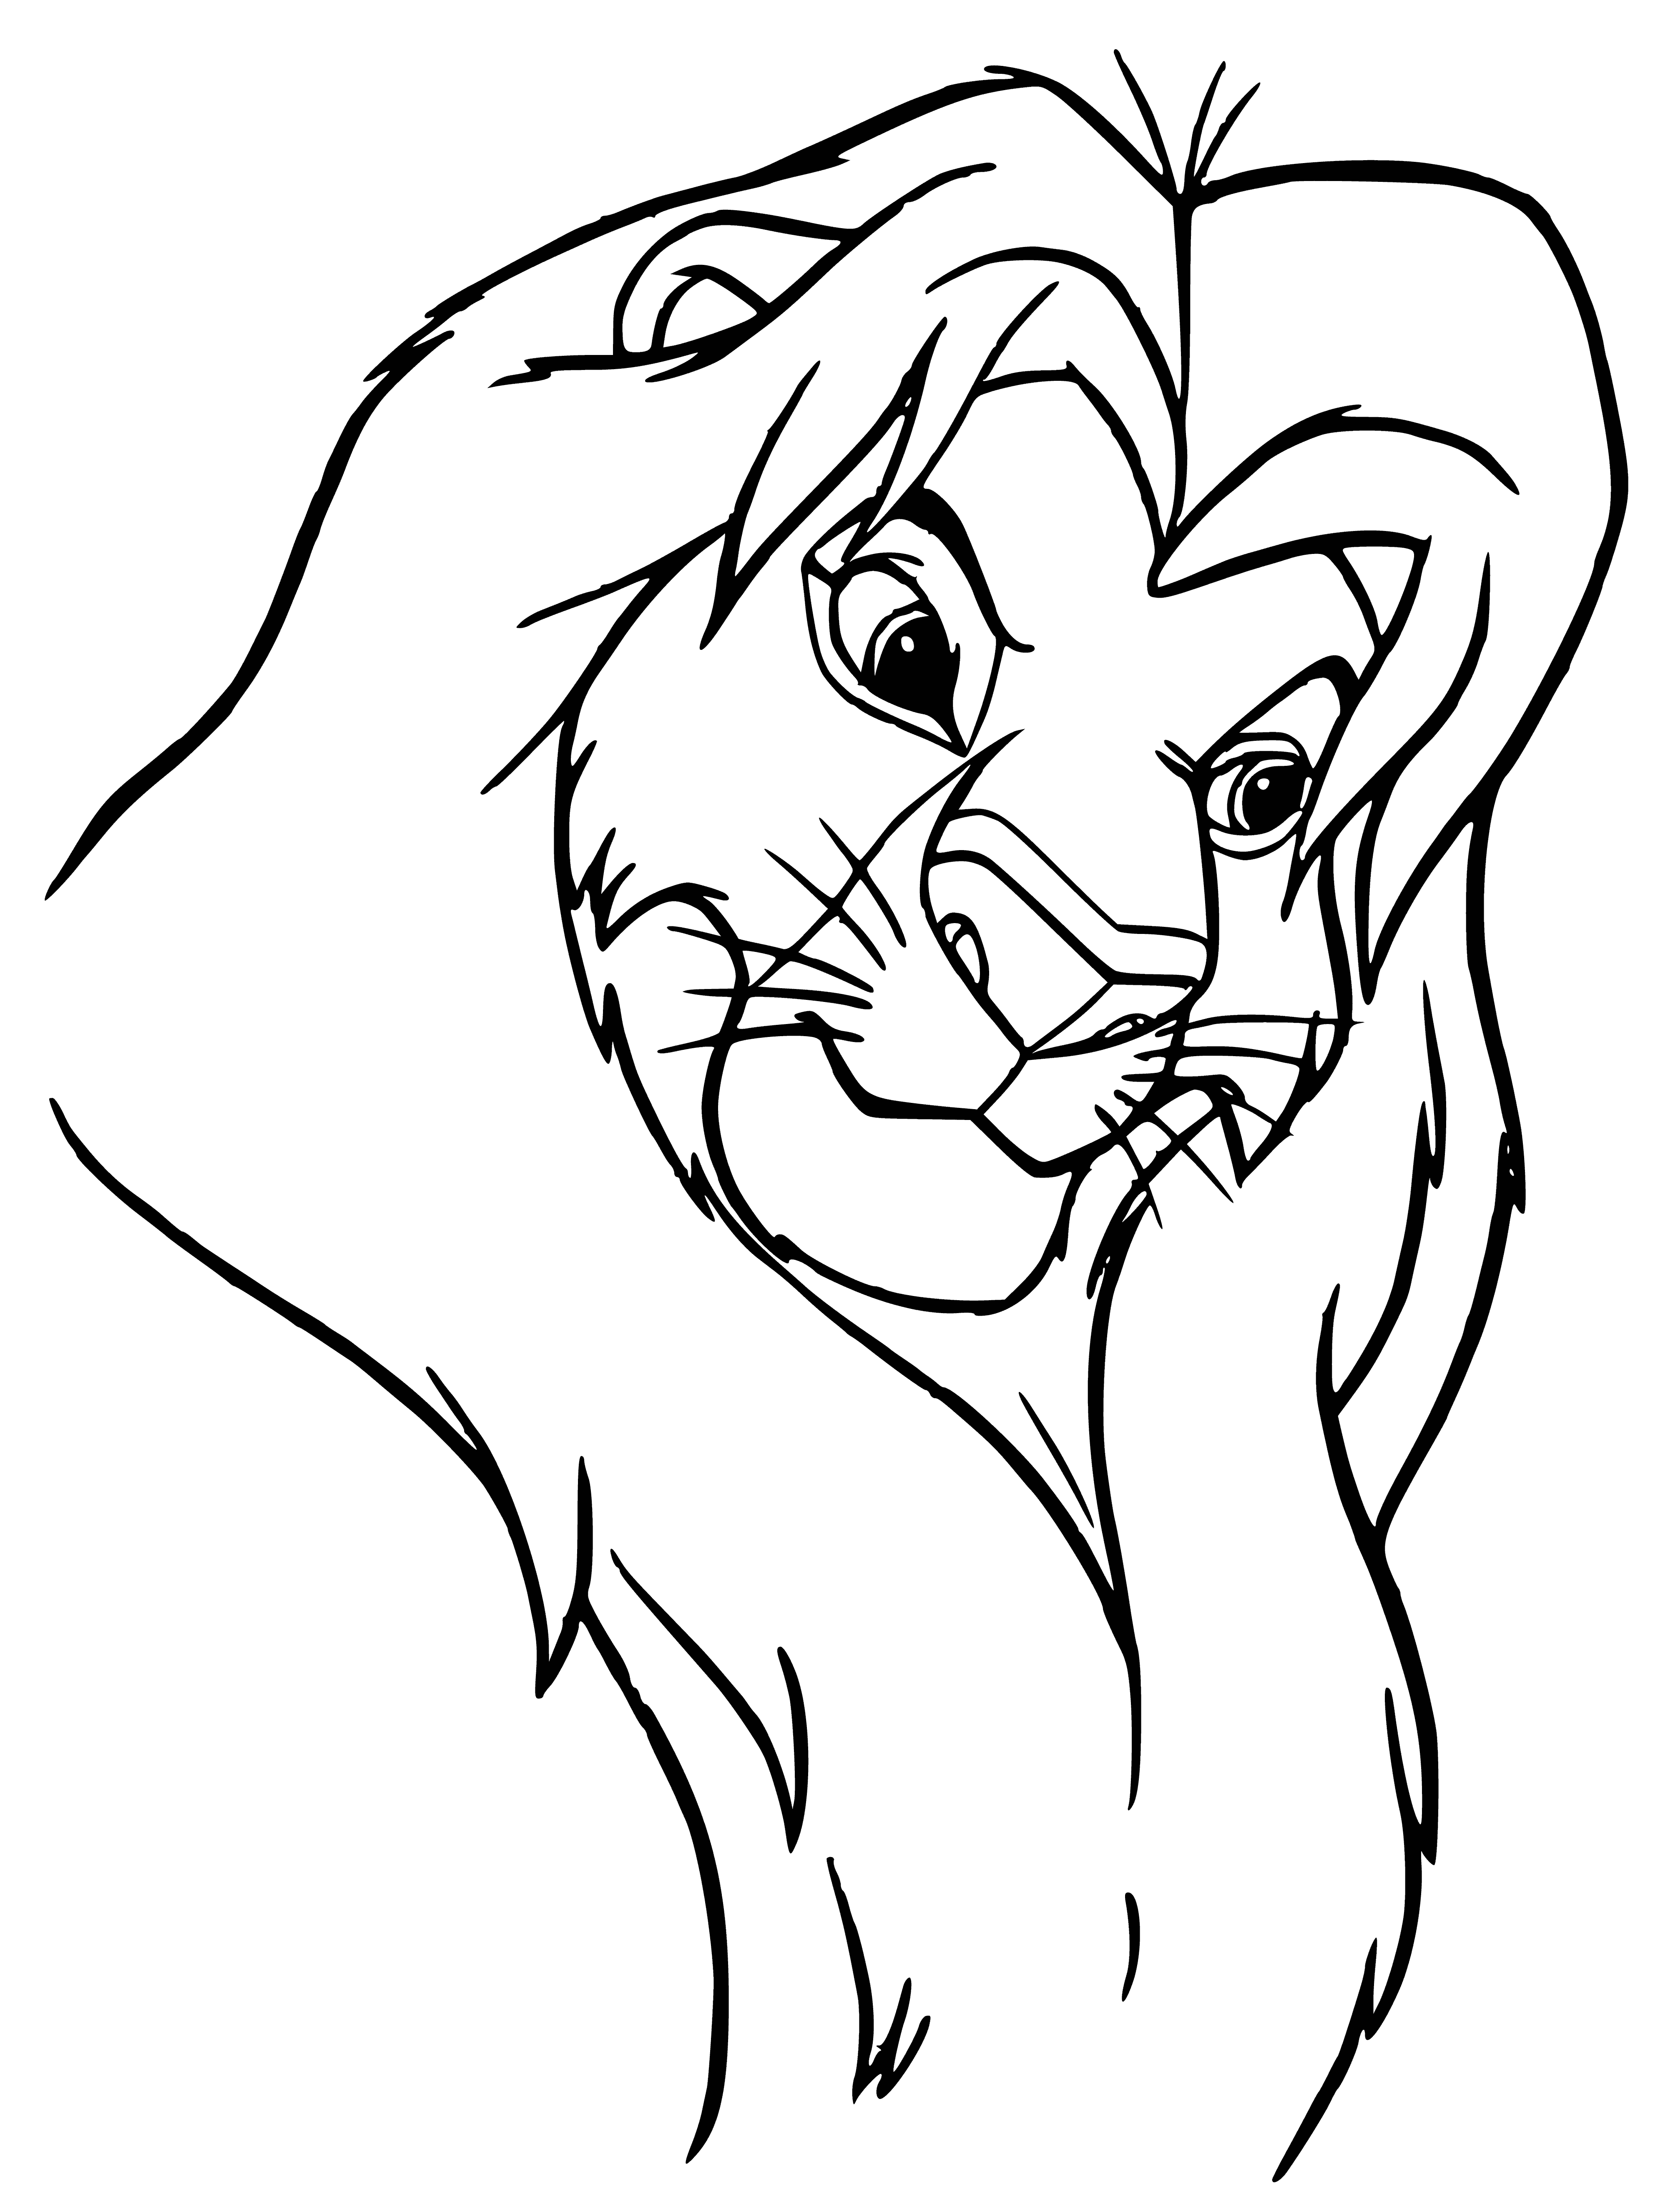 Mufasa coloring page